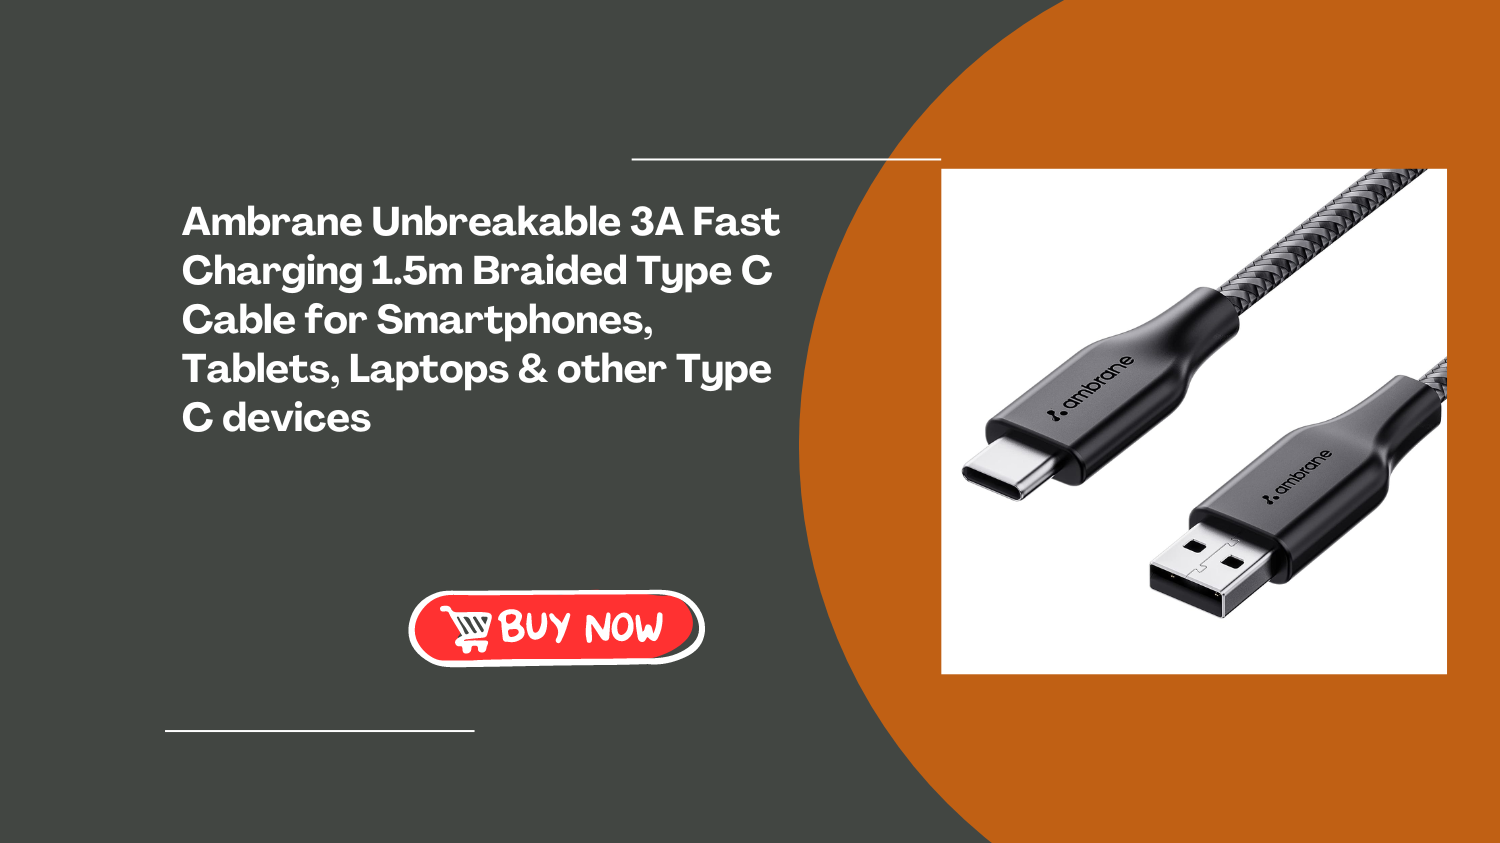 ambrane-unbreakable-3a-fast-charging-1-5m-braided-type-c-cable-for-smartphones-tablets-laptops-other-type-c-devices